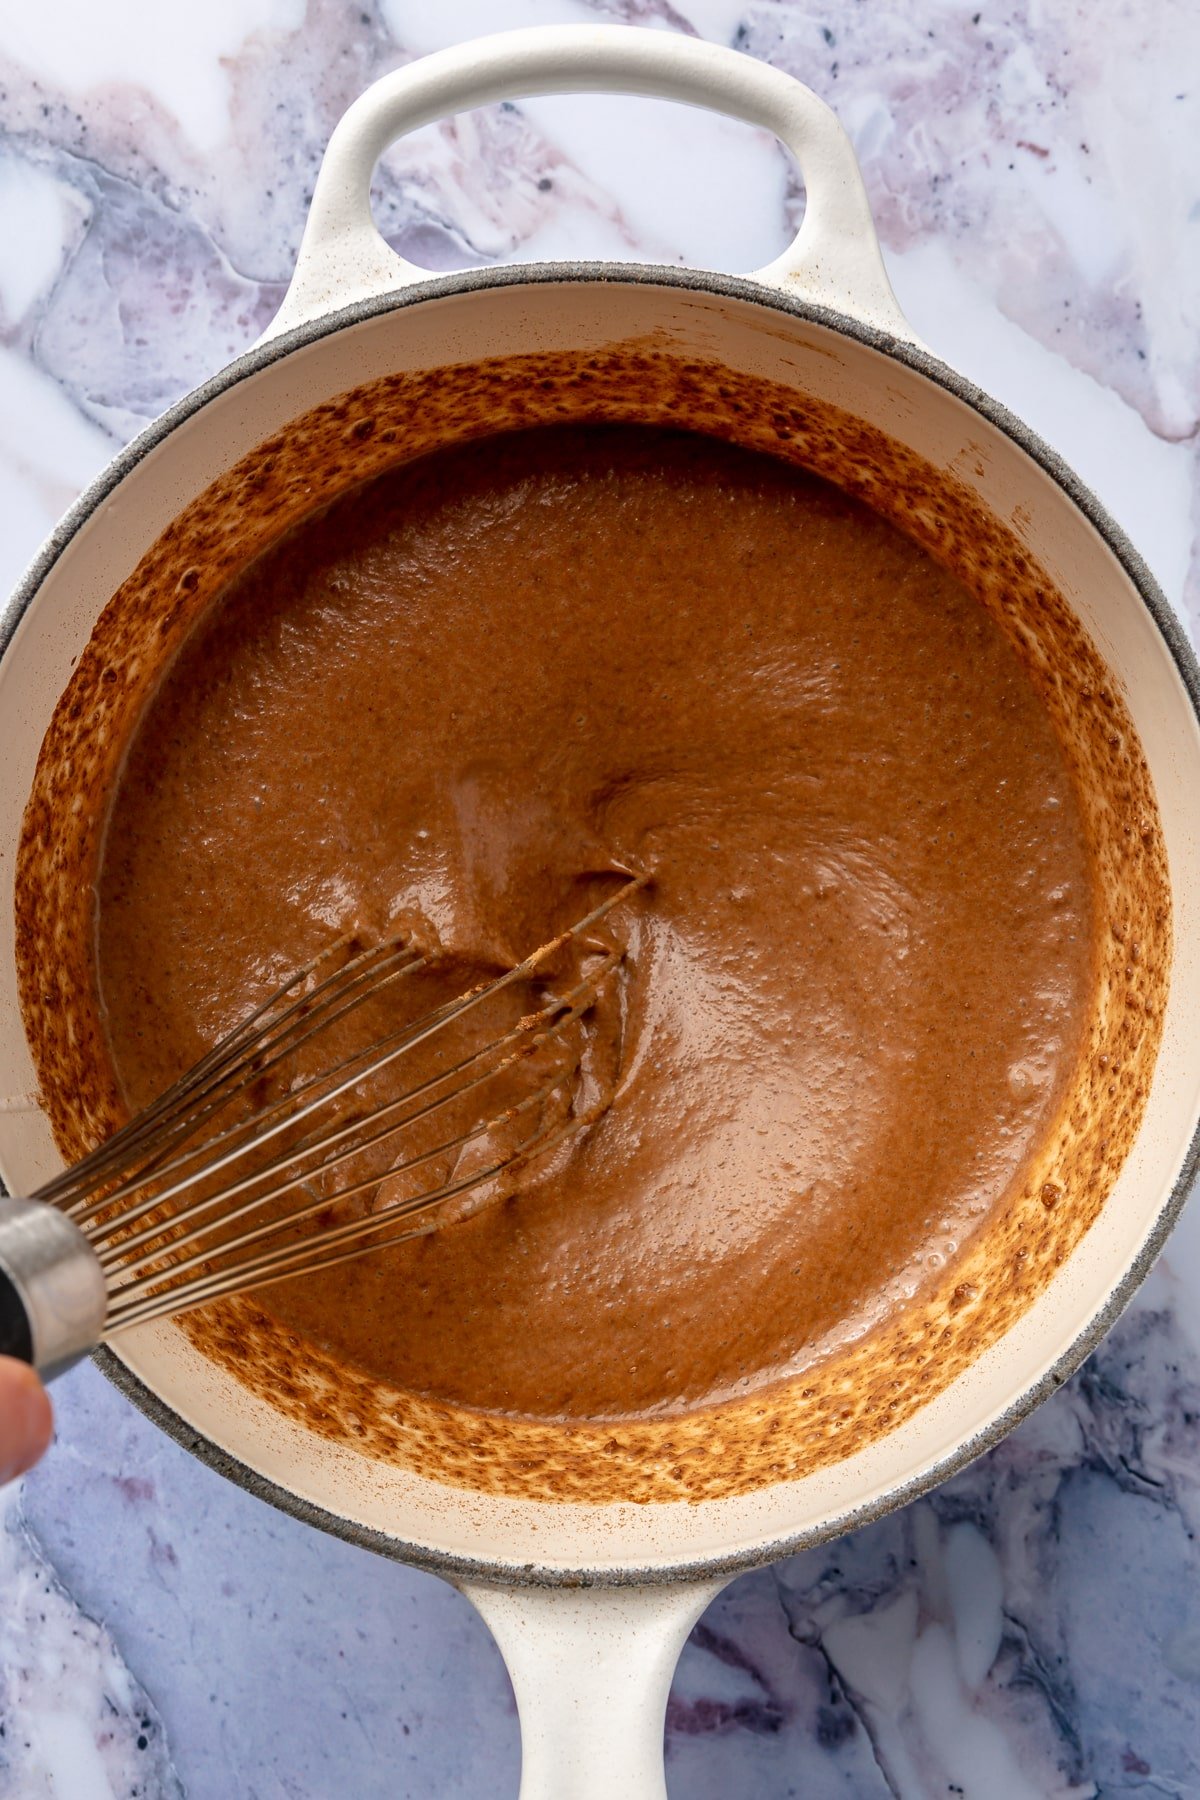 Ingredients are shown being whisked together to create a thick brown mixture.